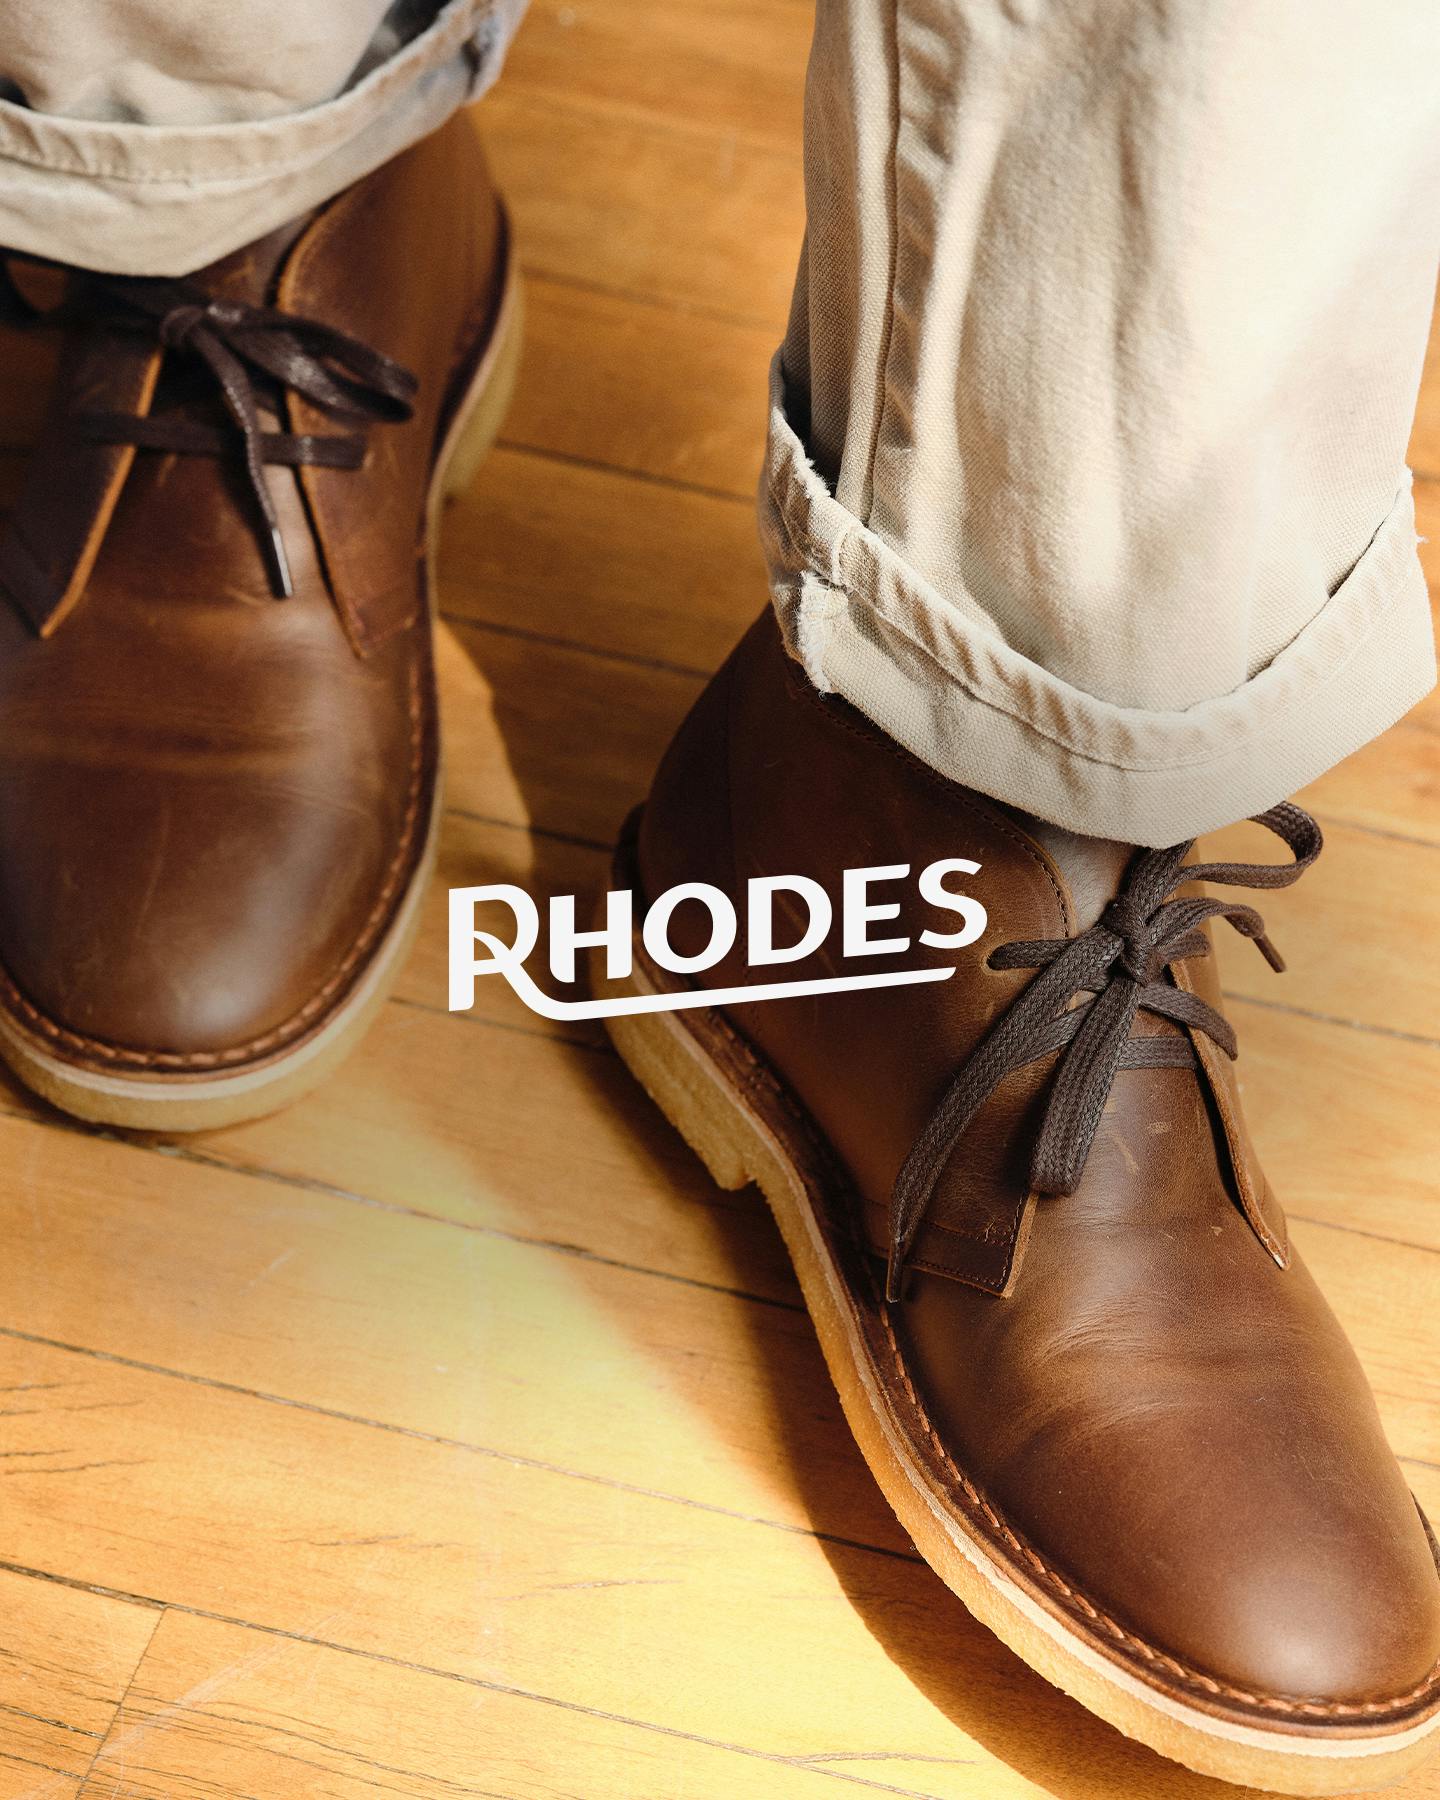 Model wearing leather Rhodes shoes